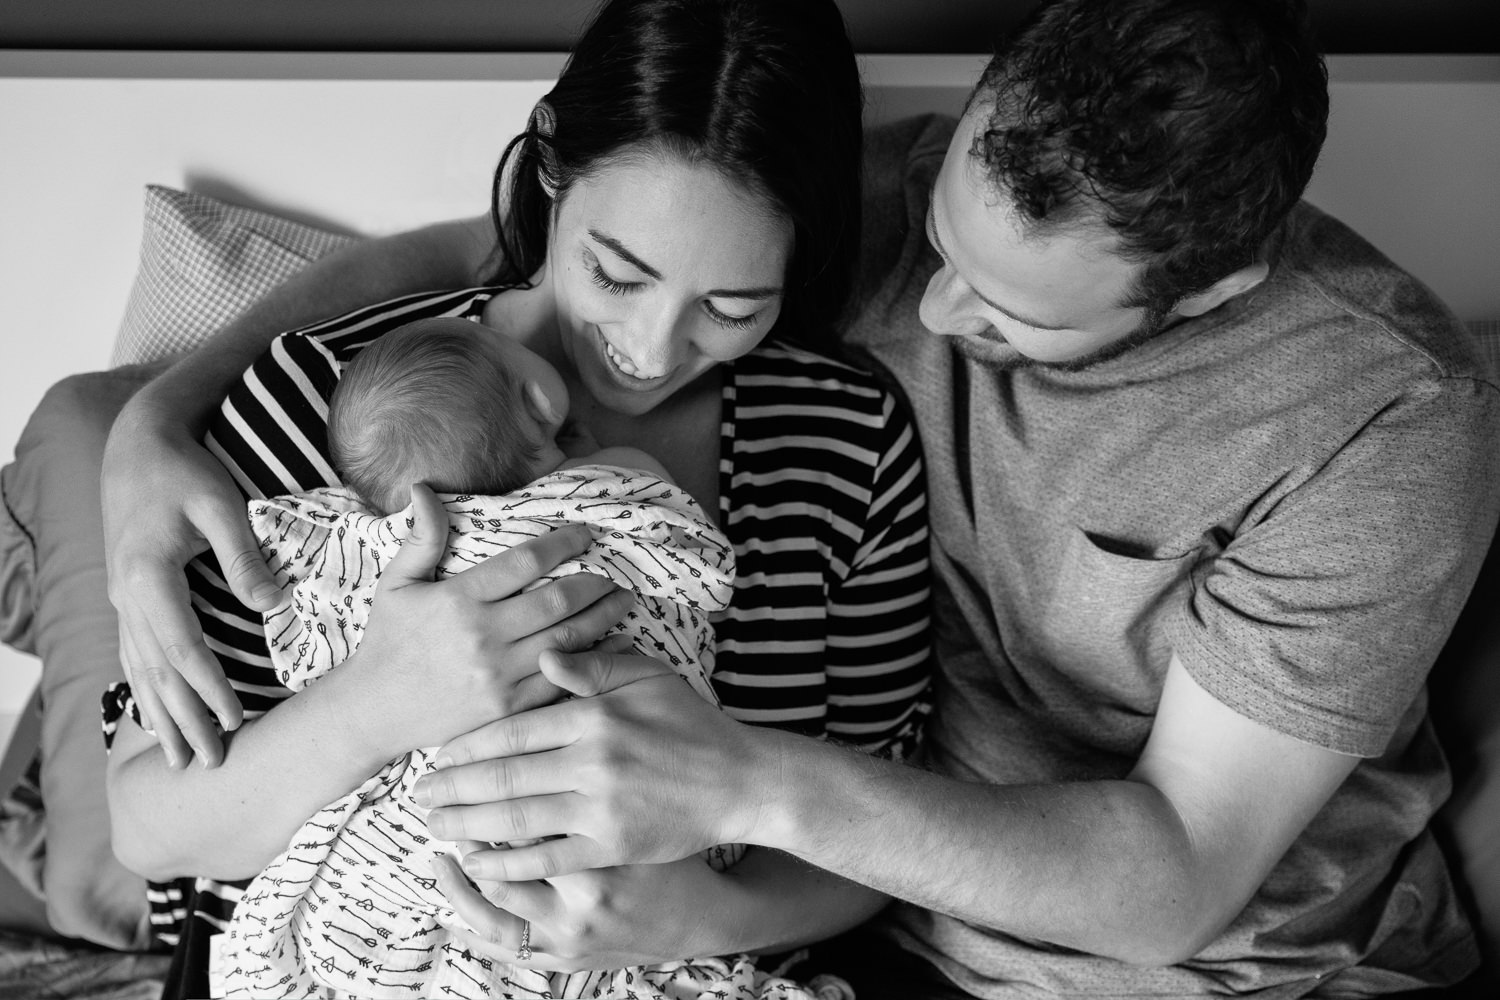 family of 3, new parents cuddle on bed, mom holding 2 week old baby girl covered with black and white swaddle, dad embracing wife and daughter - Markham Lifestyle Photography